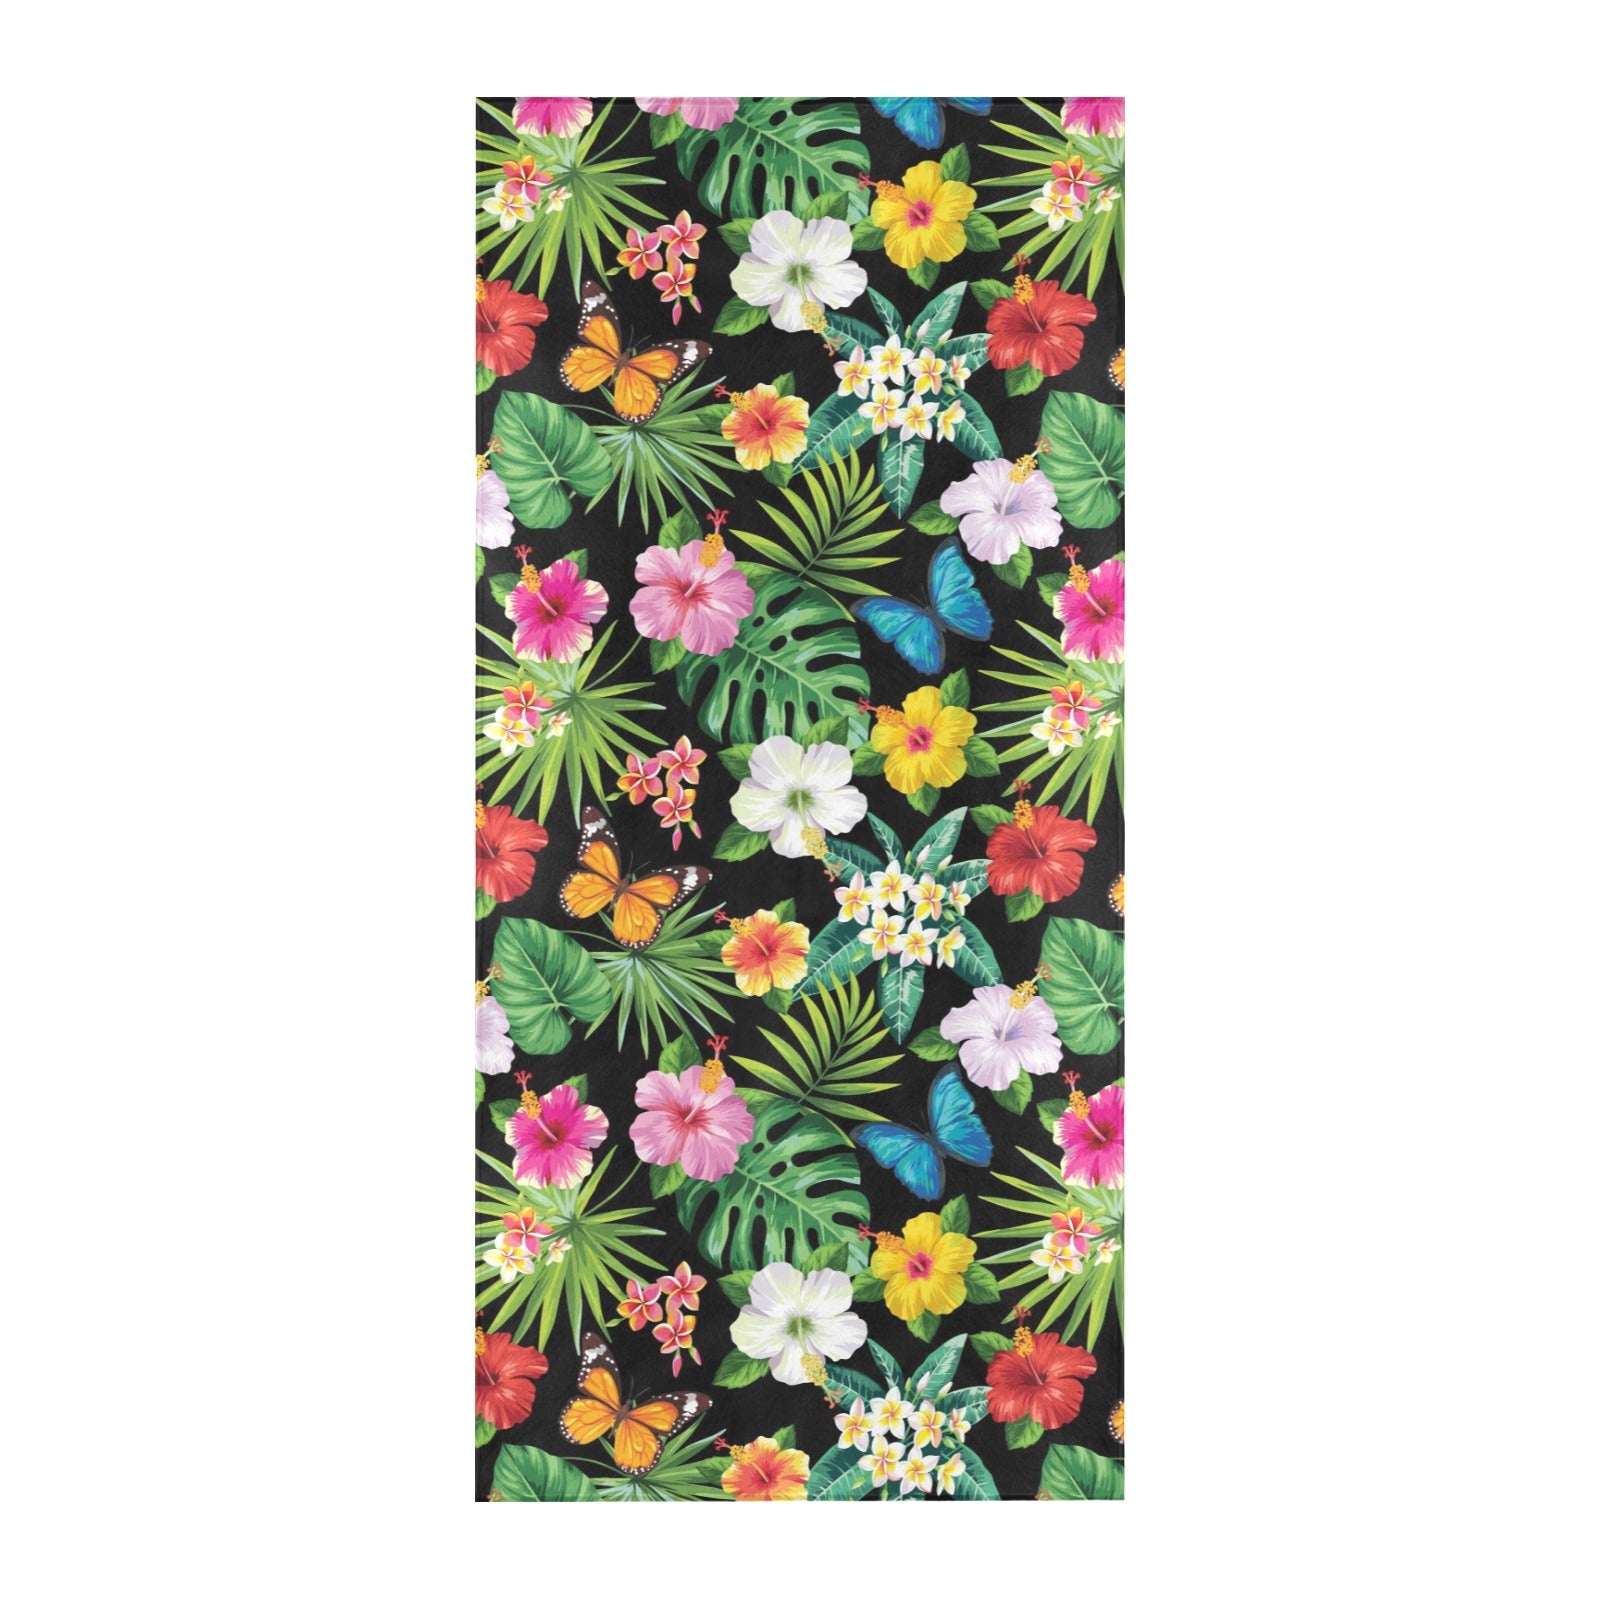 Hibiscus With Butterfly Print Design LKS305 Beach Towel 32" x 71"